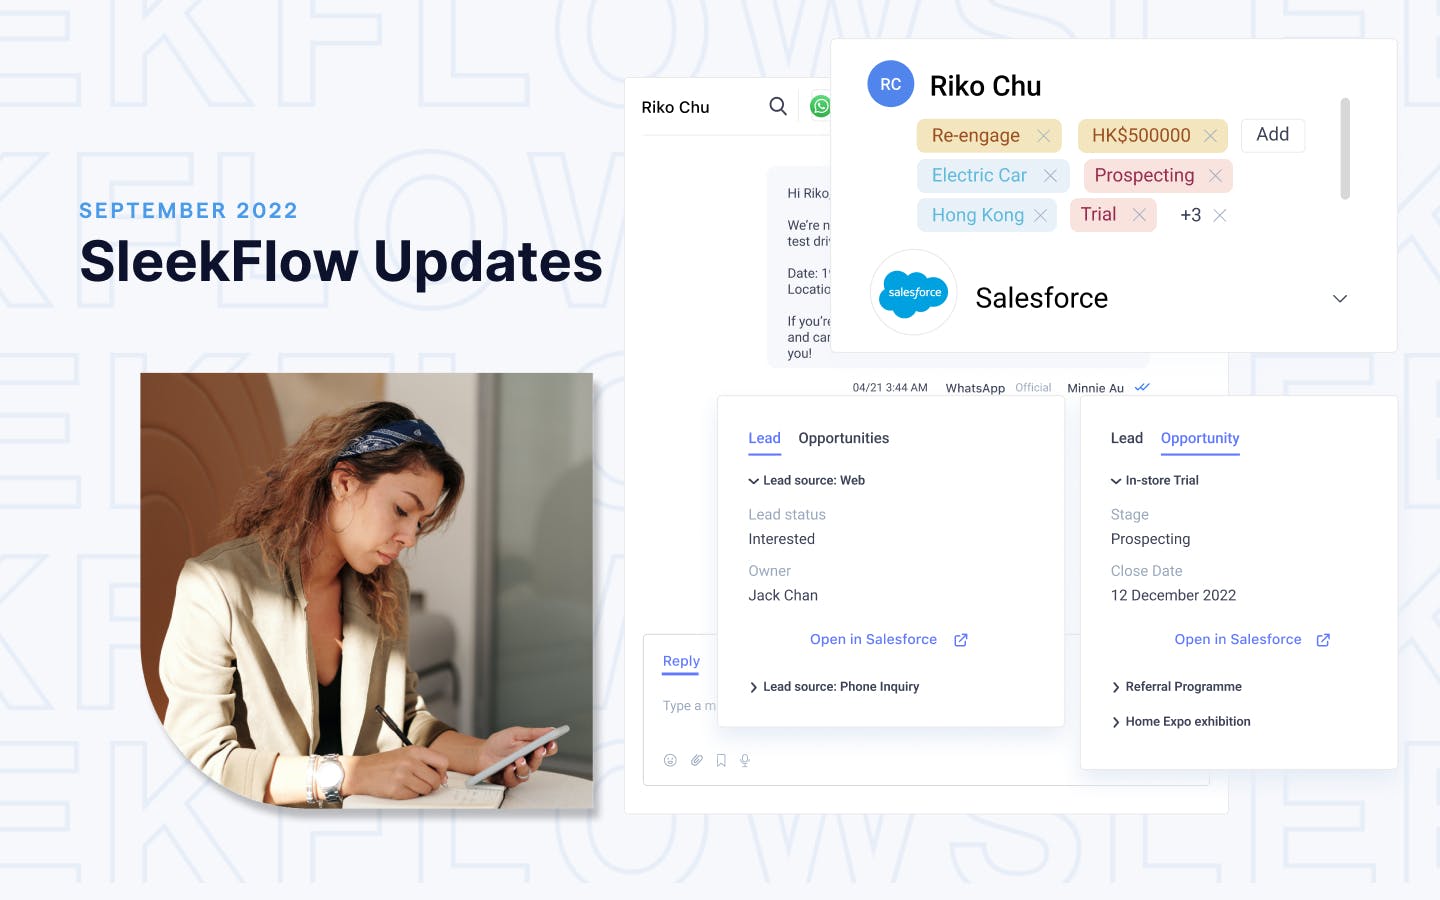 What’s new in SleekFlow: sync Salesforce contacts, leads, and opportunities for performance and productivity